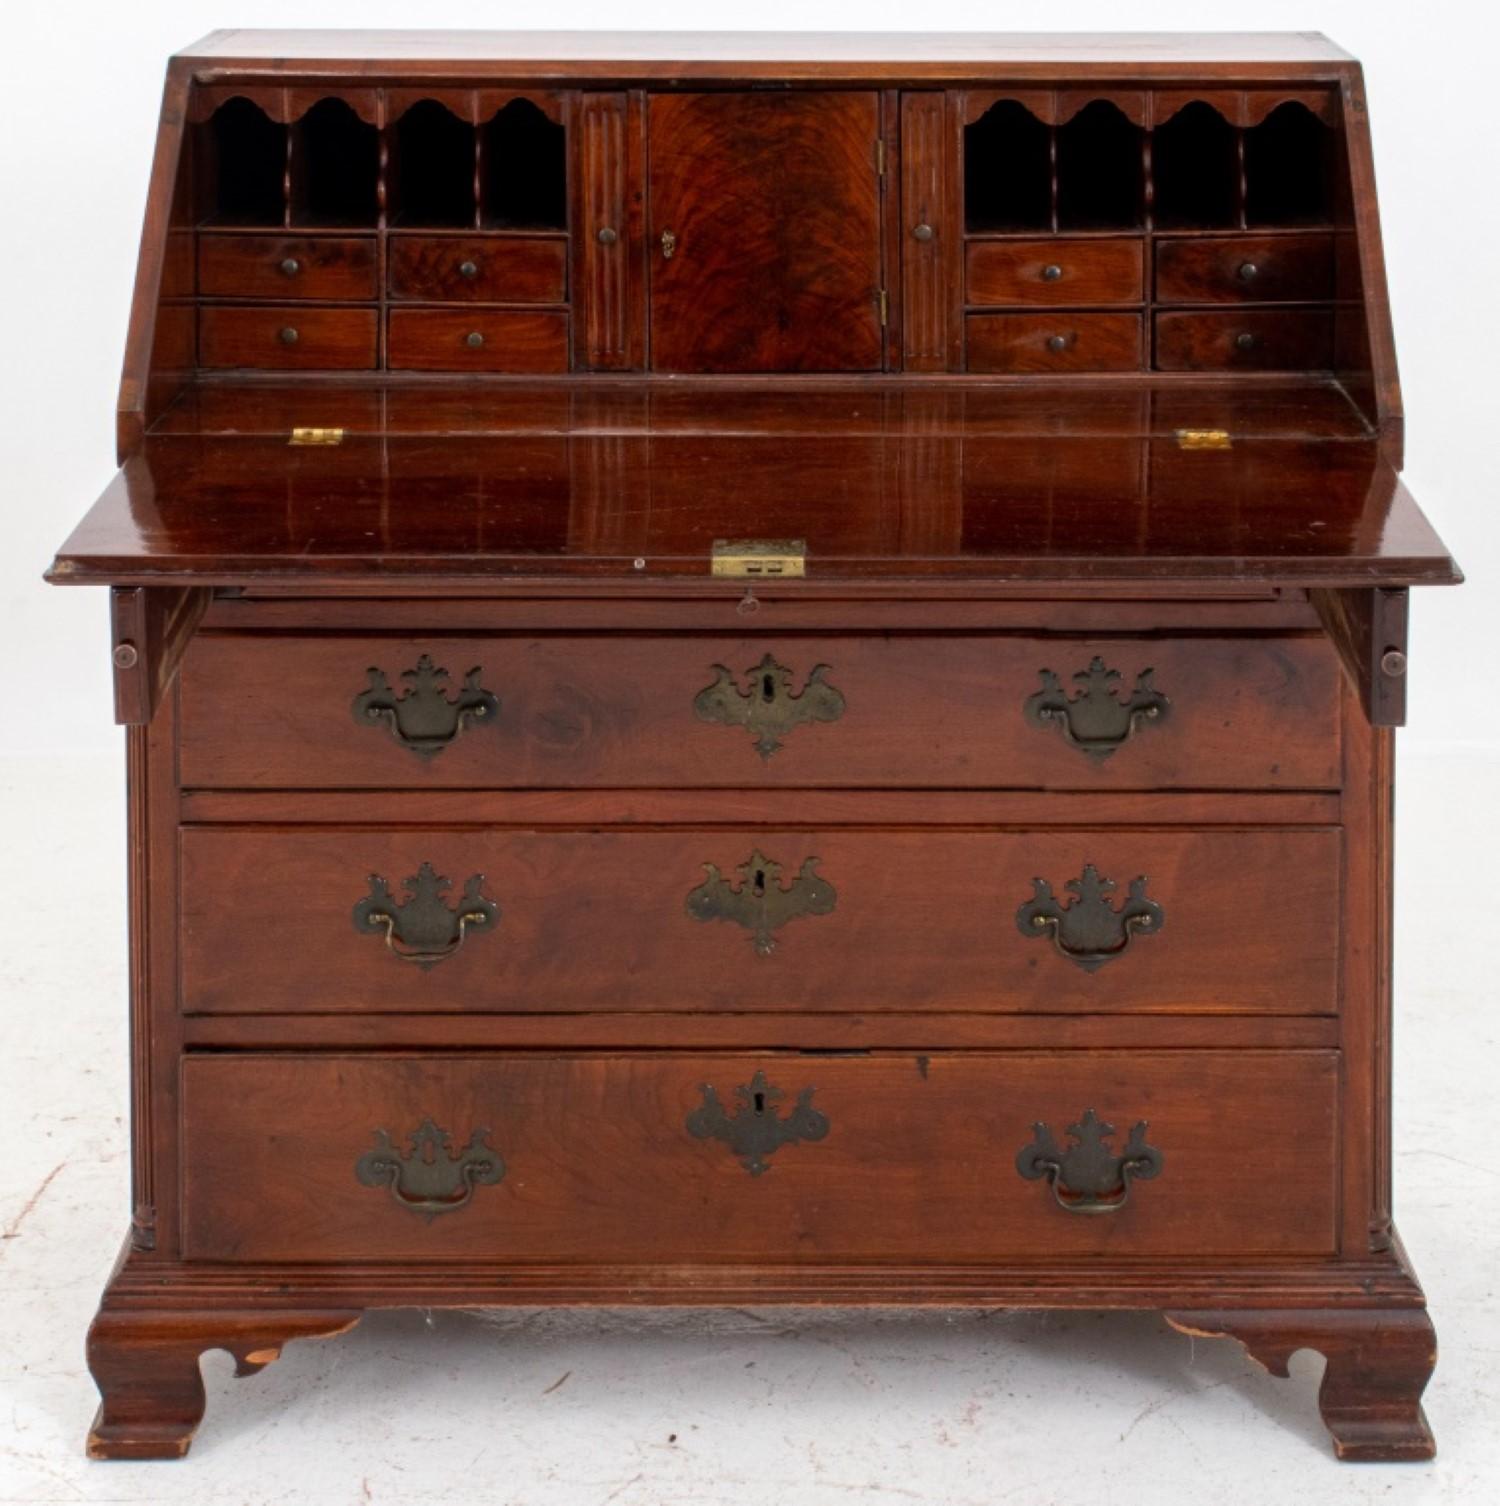 Colonial Revival 19th-century mahogany slant-front secretary desk/chest, rectangular with a slanted drop-front writing surface opening to reveal letter drawers and cubbies, above four drawers.

43 inches in height, 40 inches in width, and 22 inches